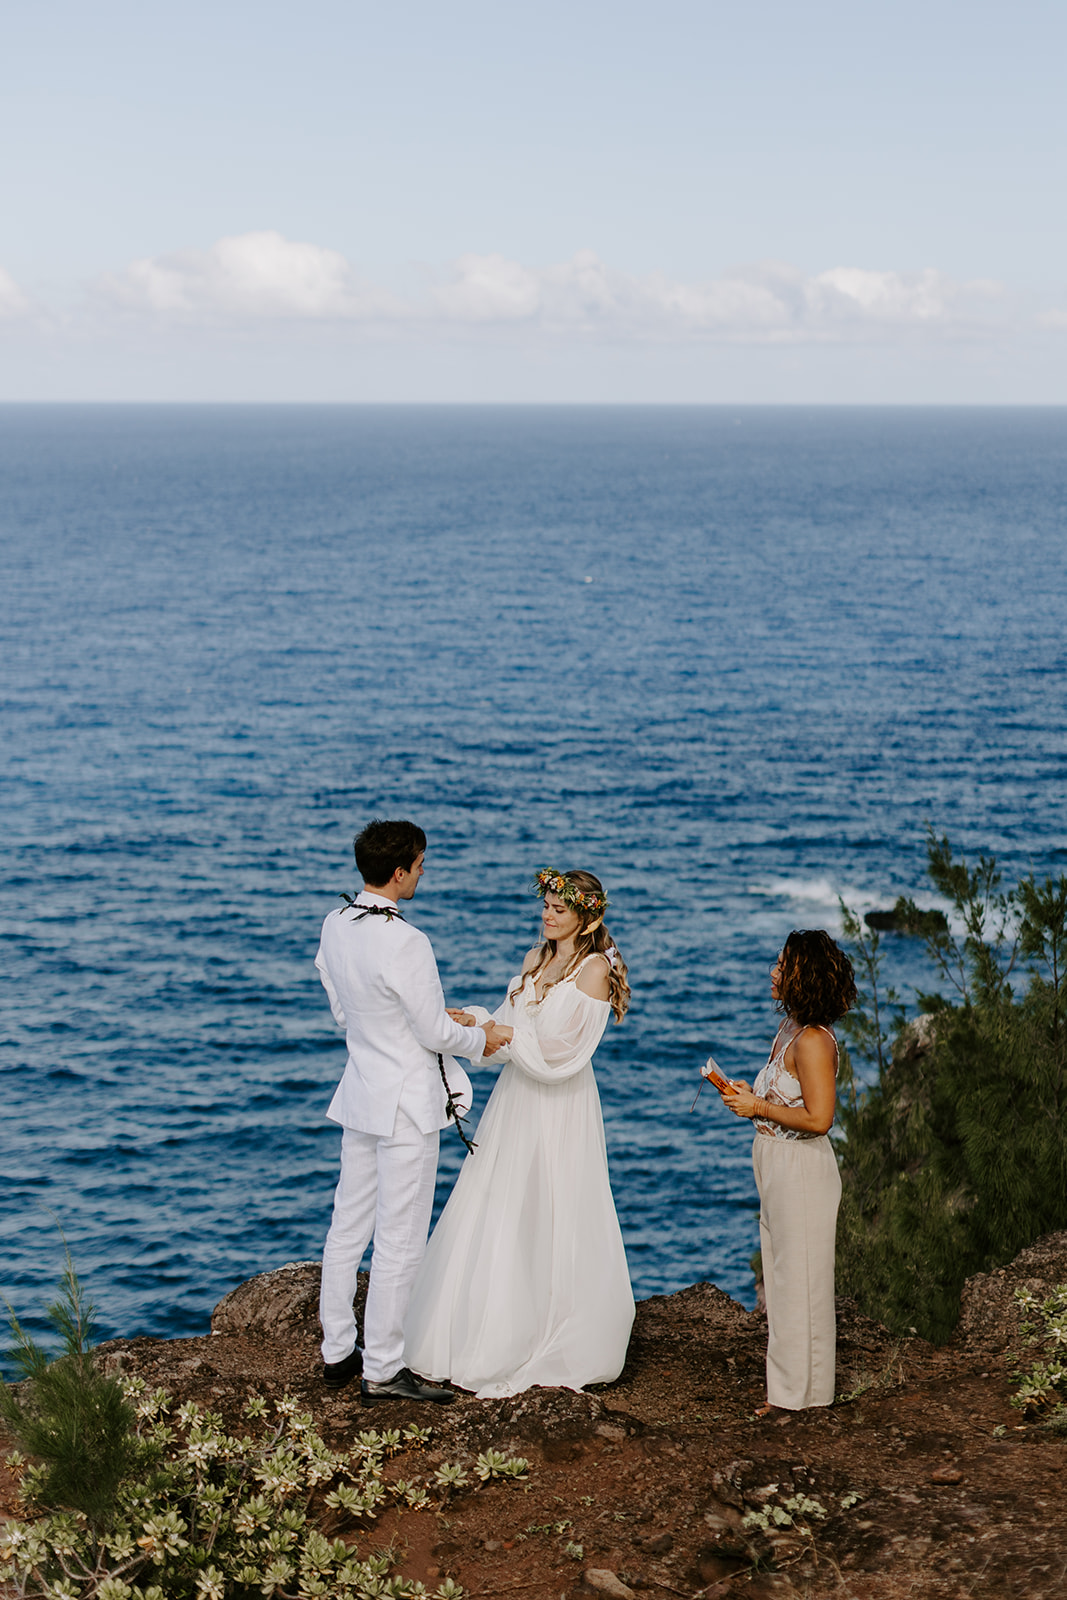 A couple who eloped in Maui say their vows during a hawaii cliffside wedding ceremony by the ocean 